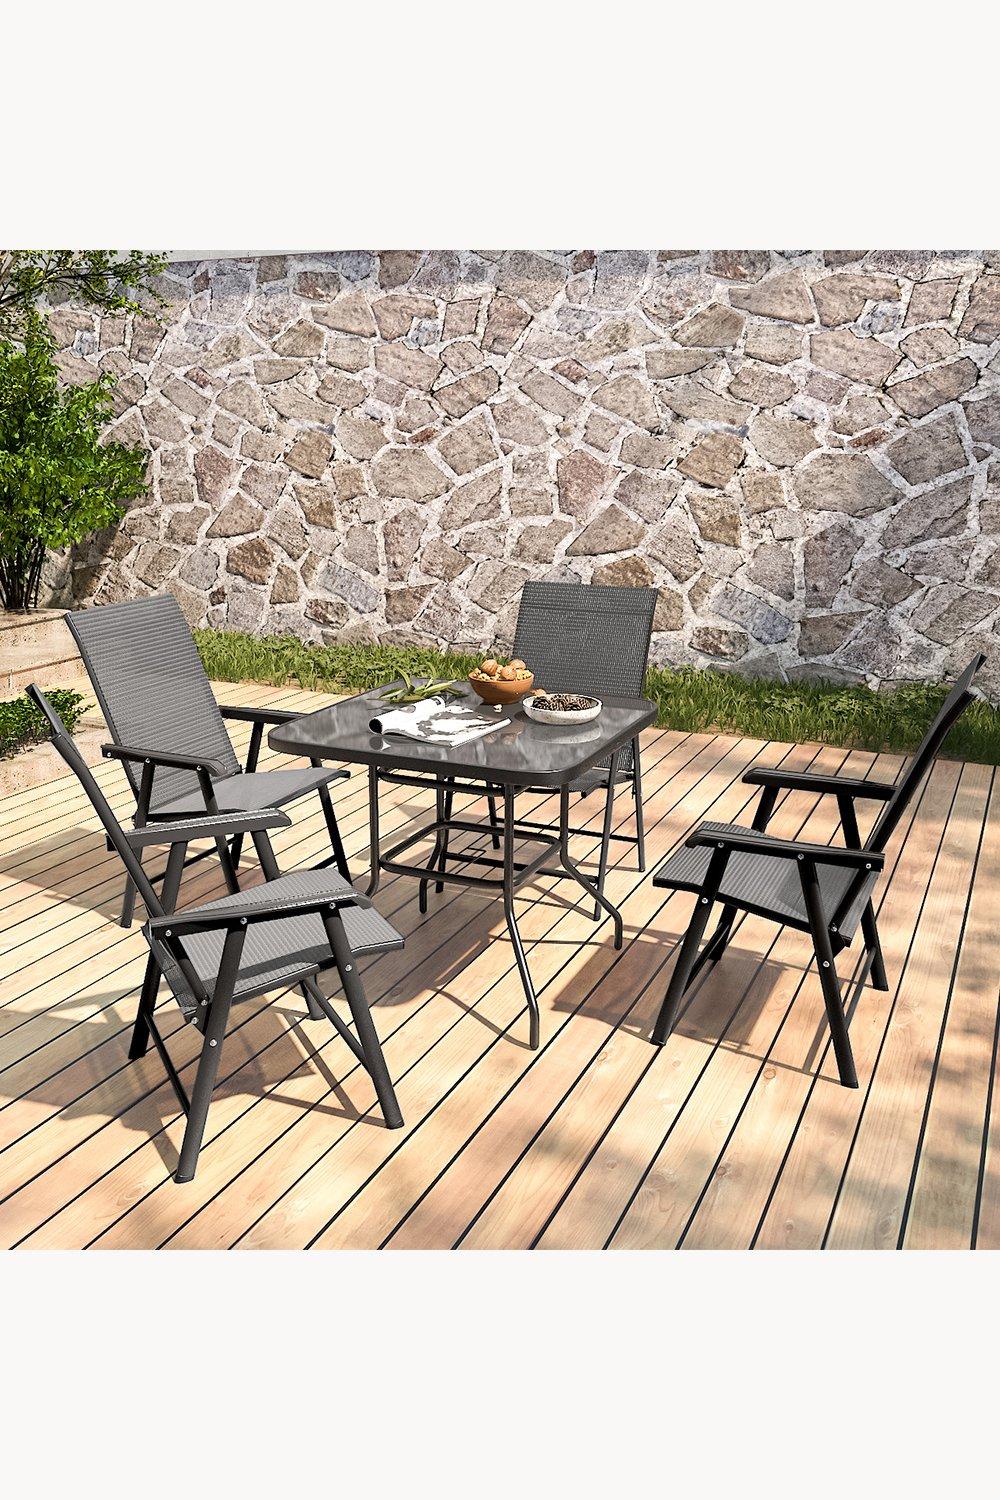 4-Seater Outdoor Garden Dining Table and Chairs Set